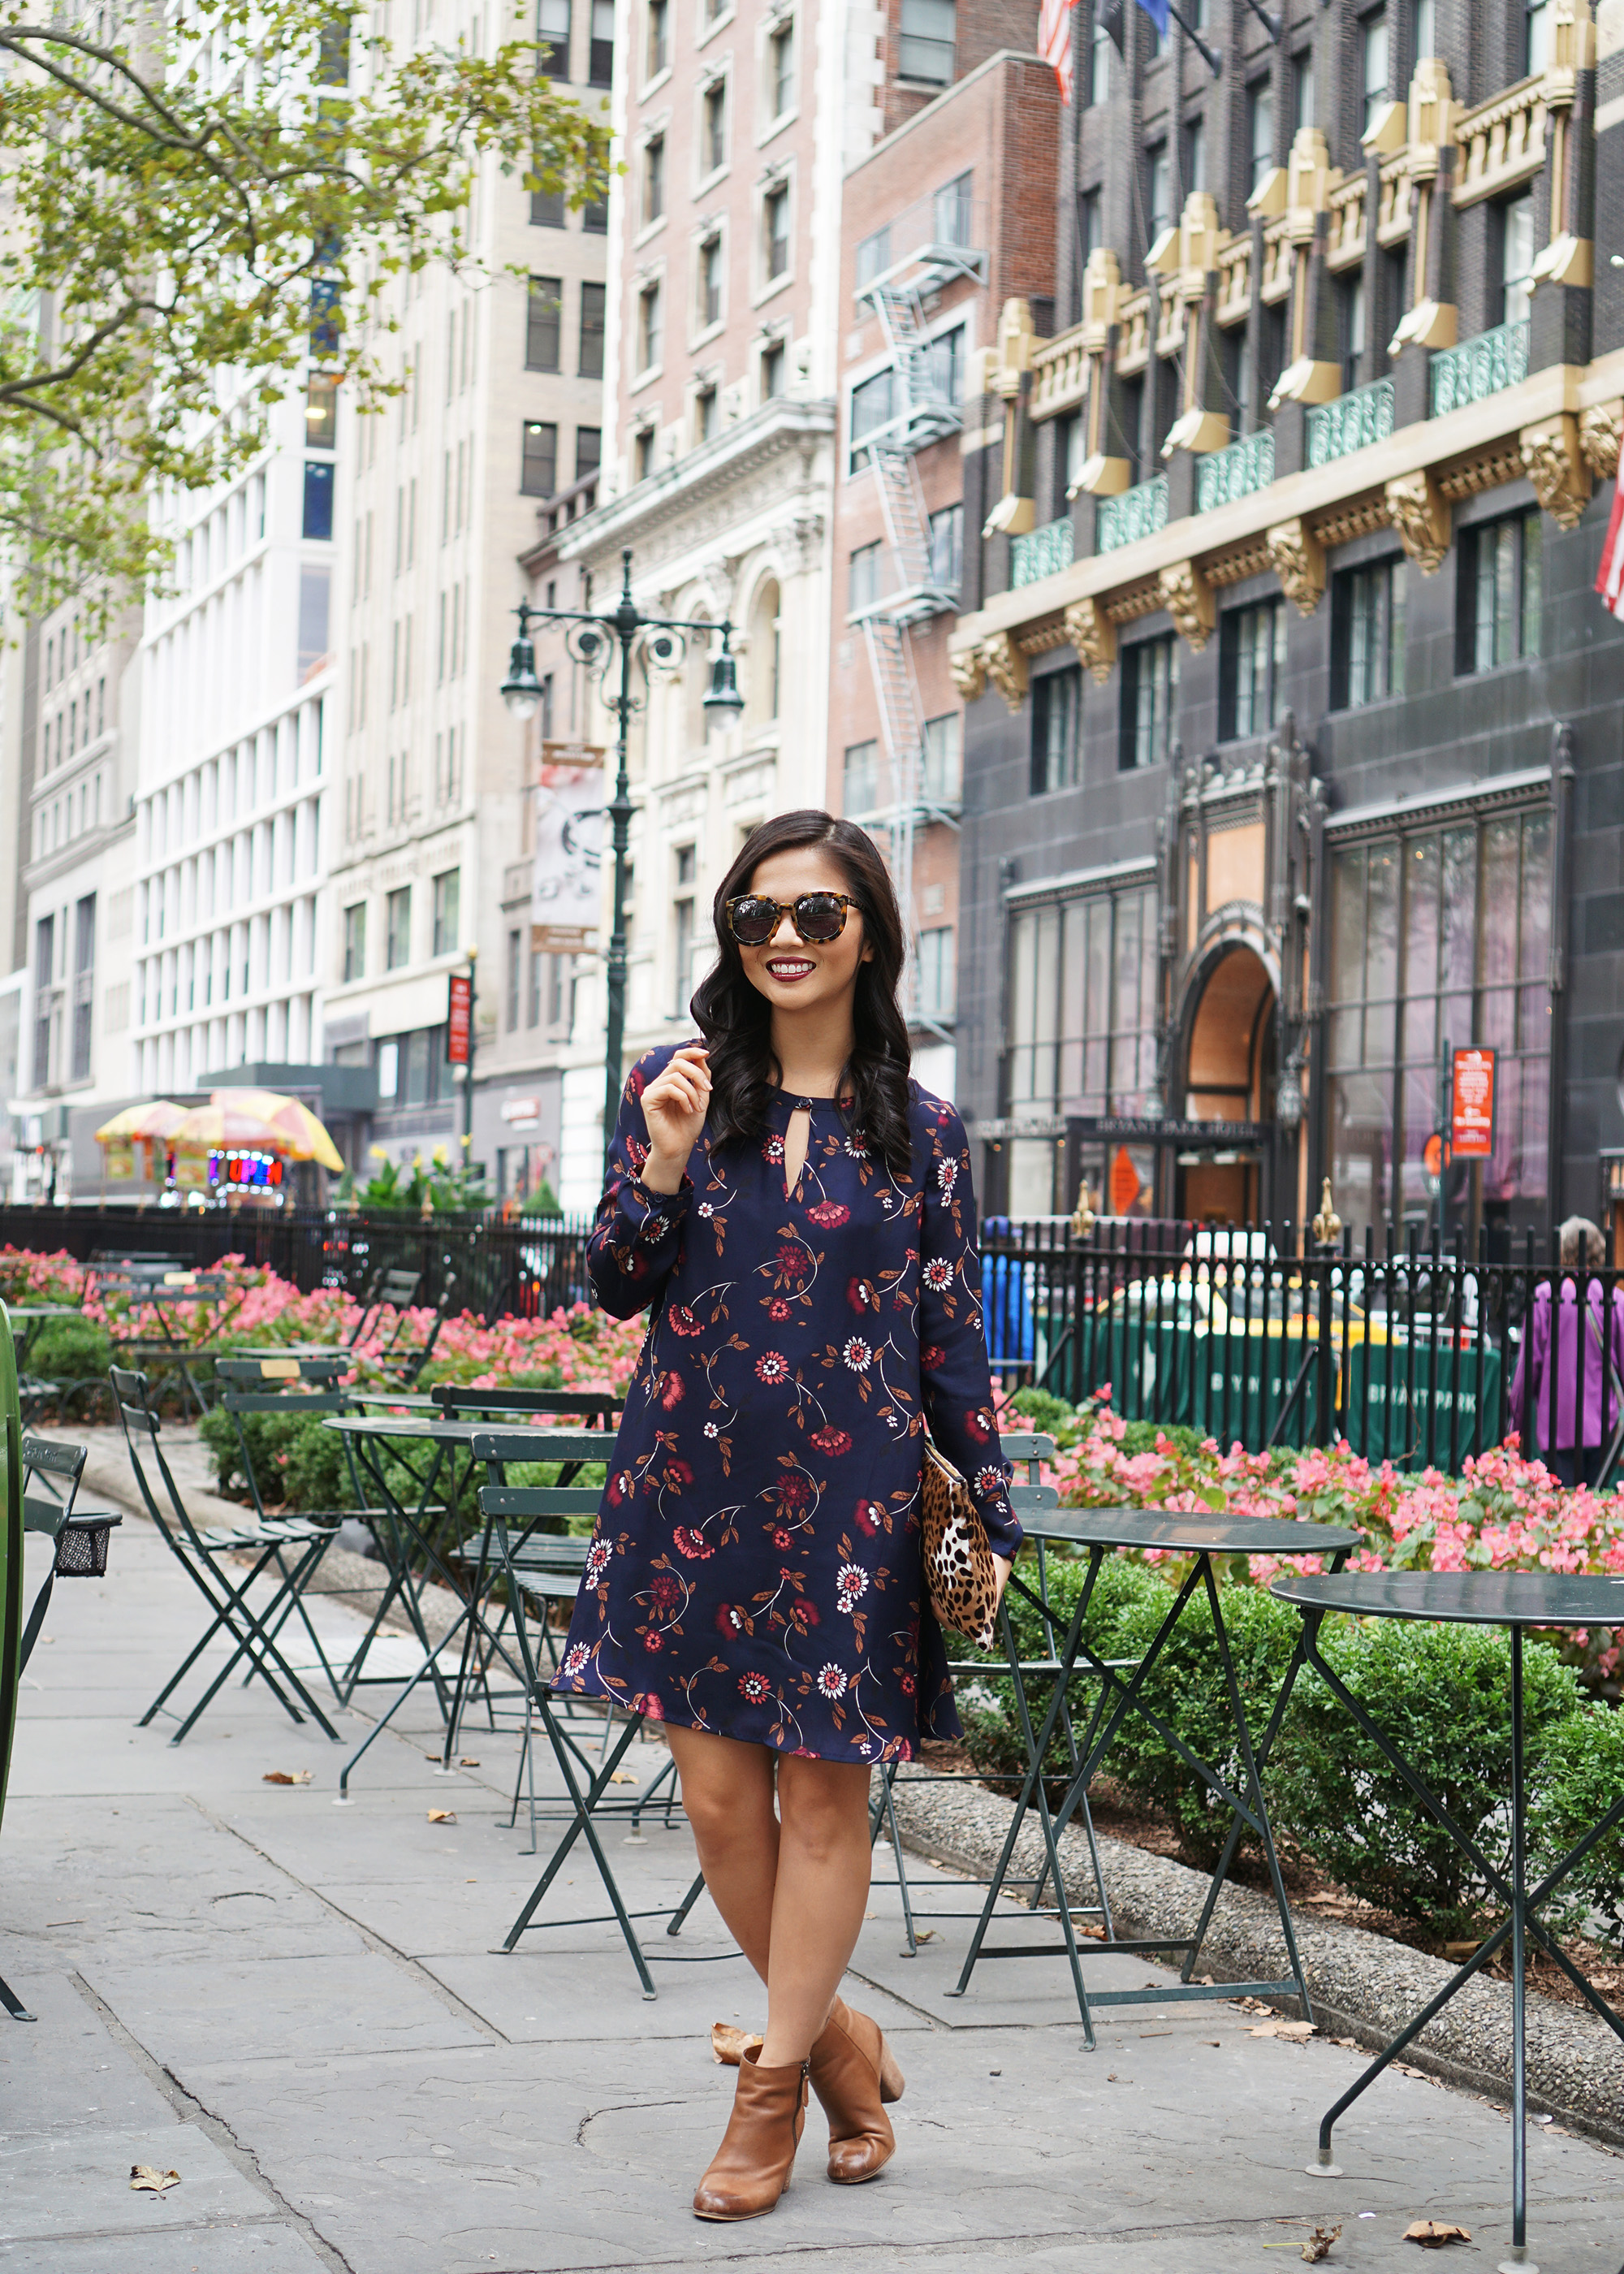 Skirt The Rules / Fall Floral Swing Dress